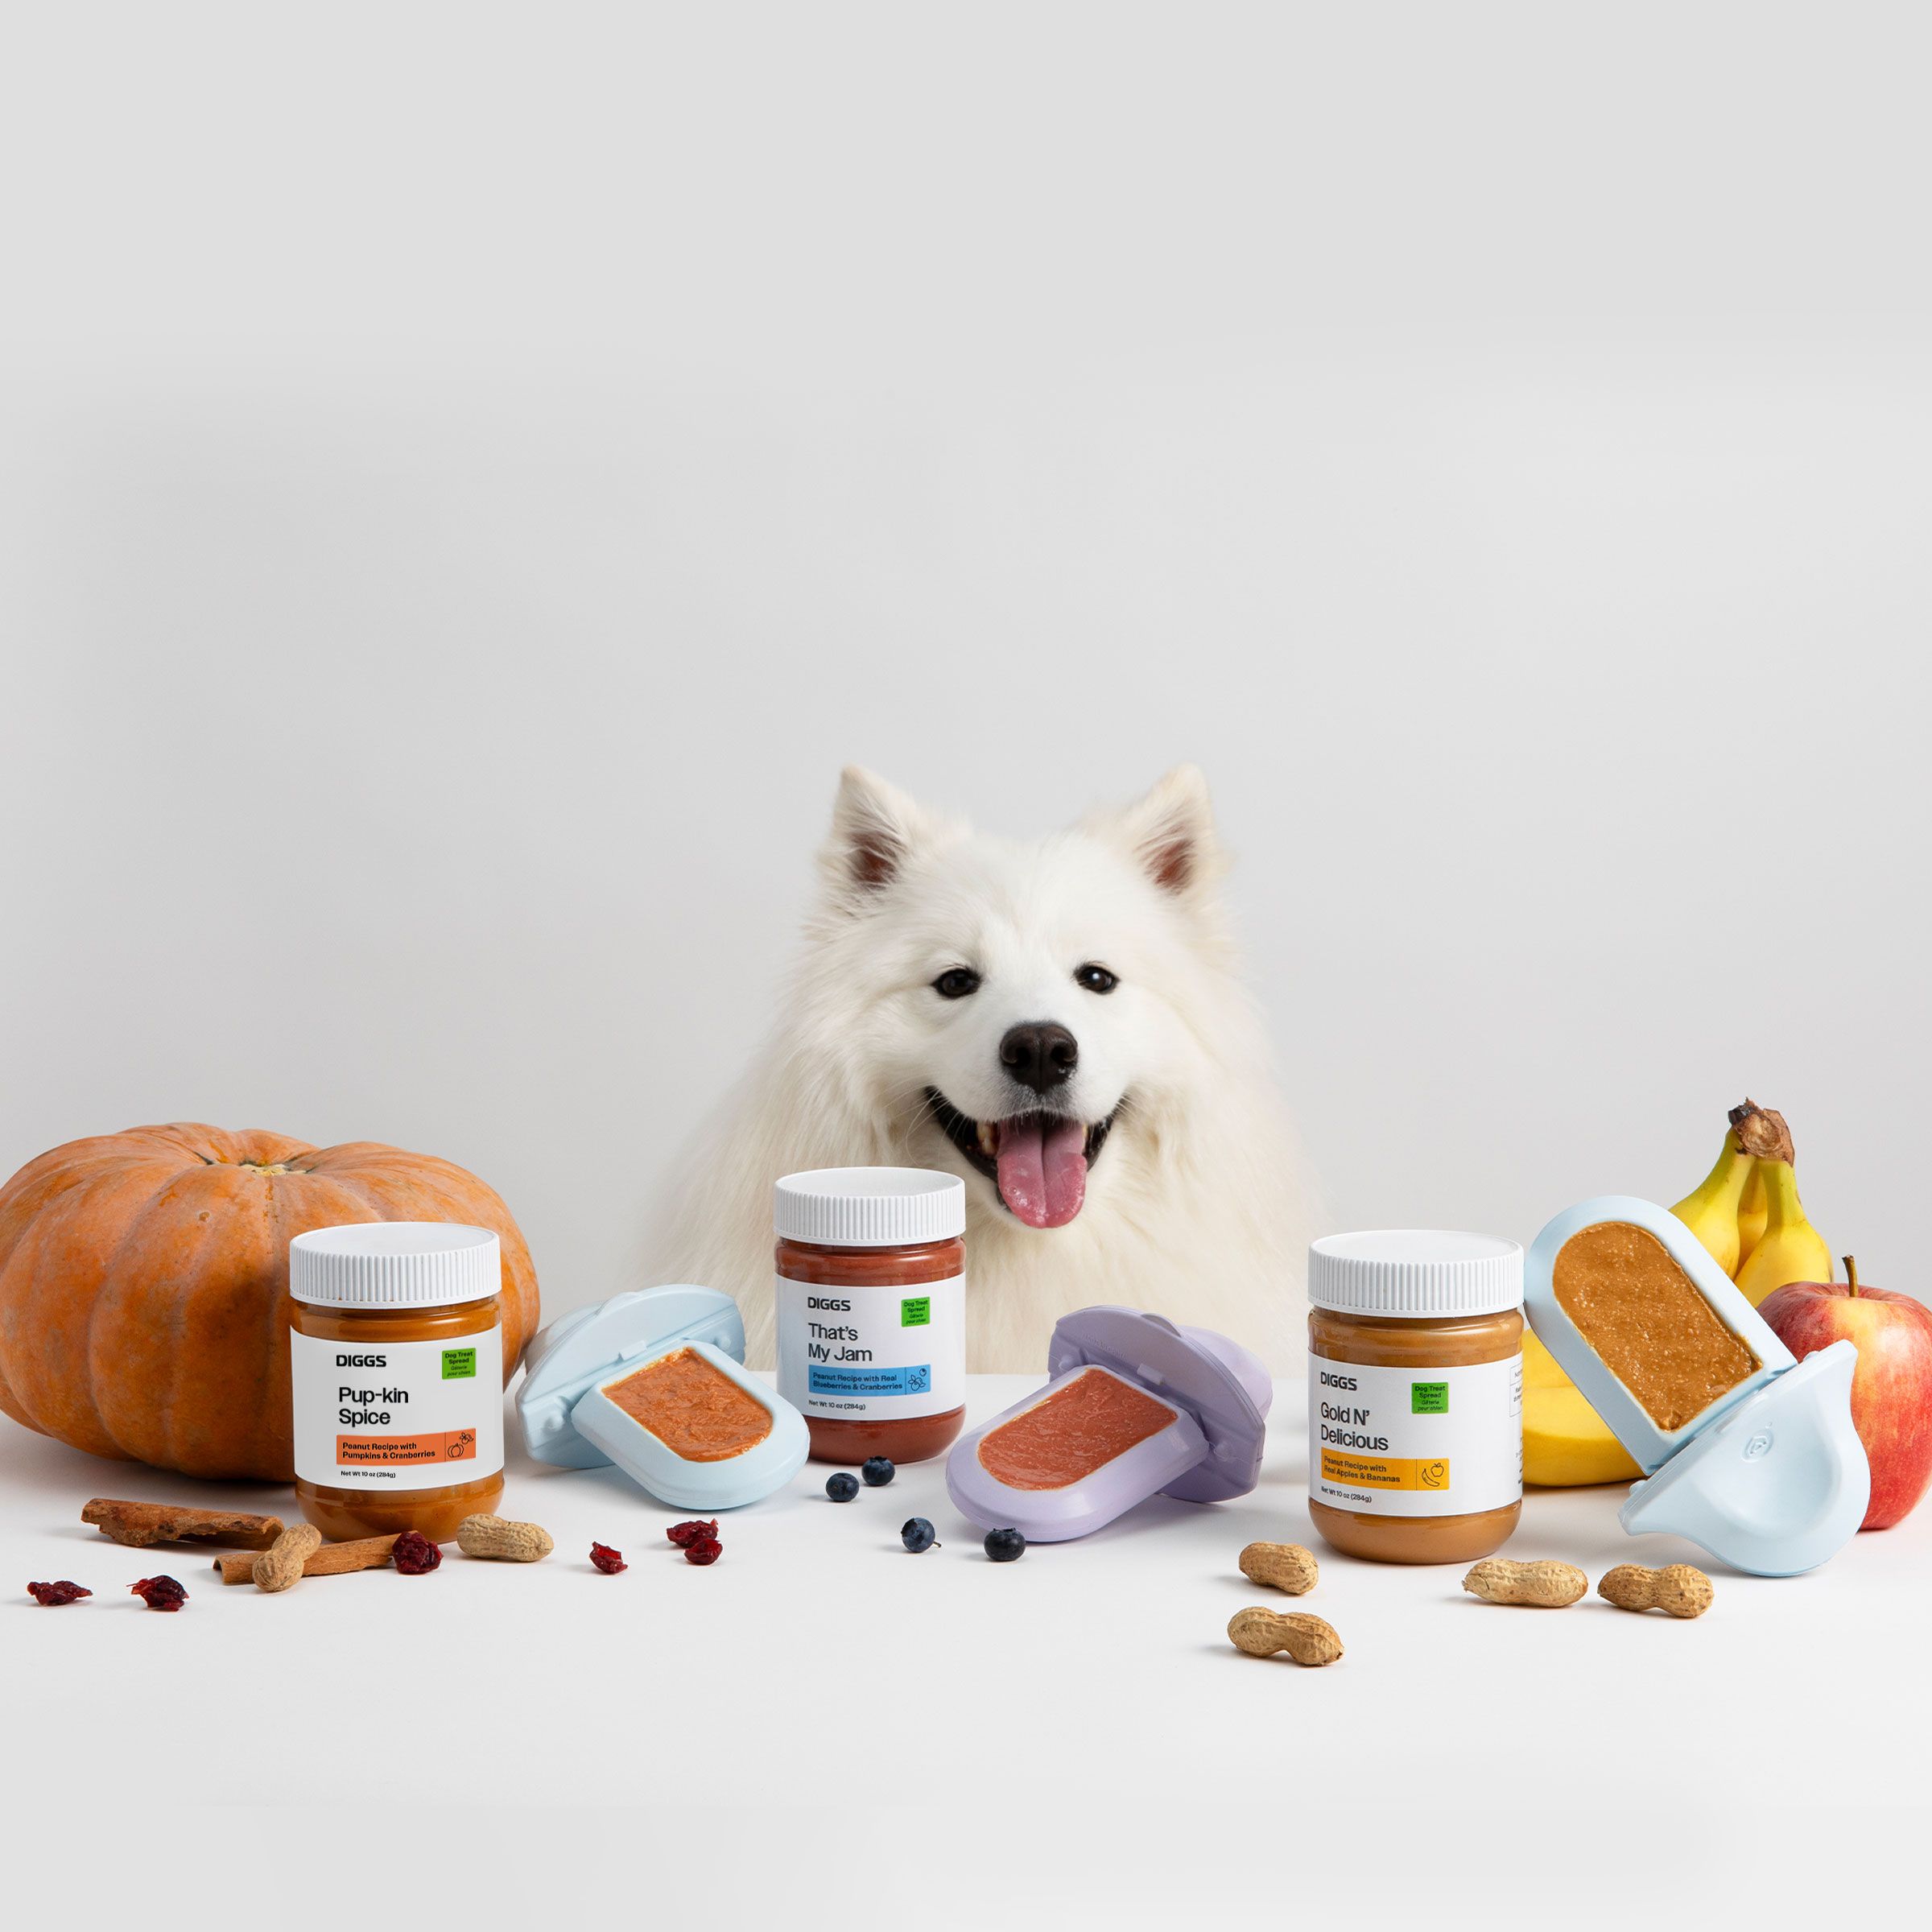 All three flavors of Diggs Treat Spreads and Groov Crate Training Aid laid out on a table next to the ingredients (nuts, fruits) in front of a dog